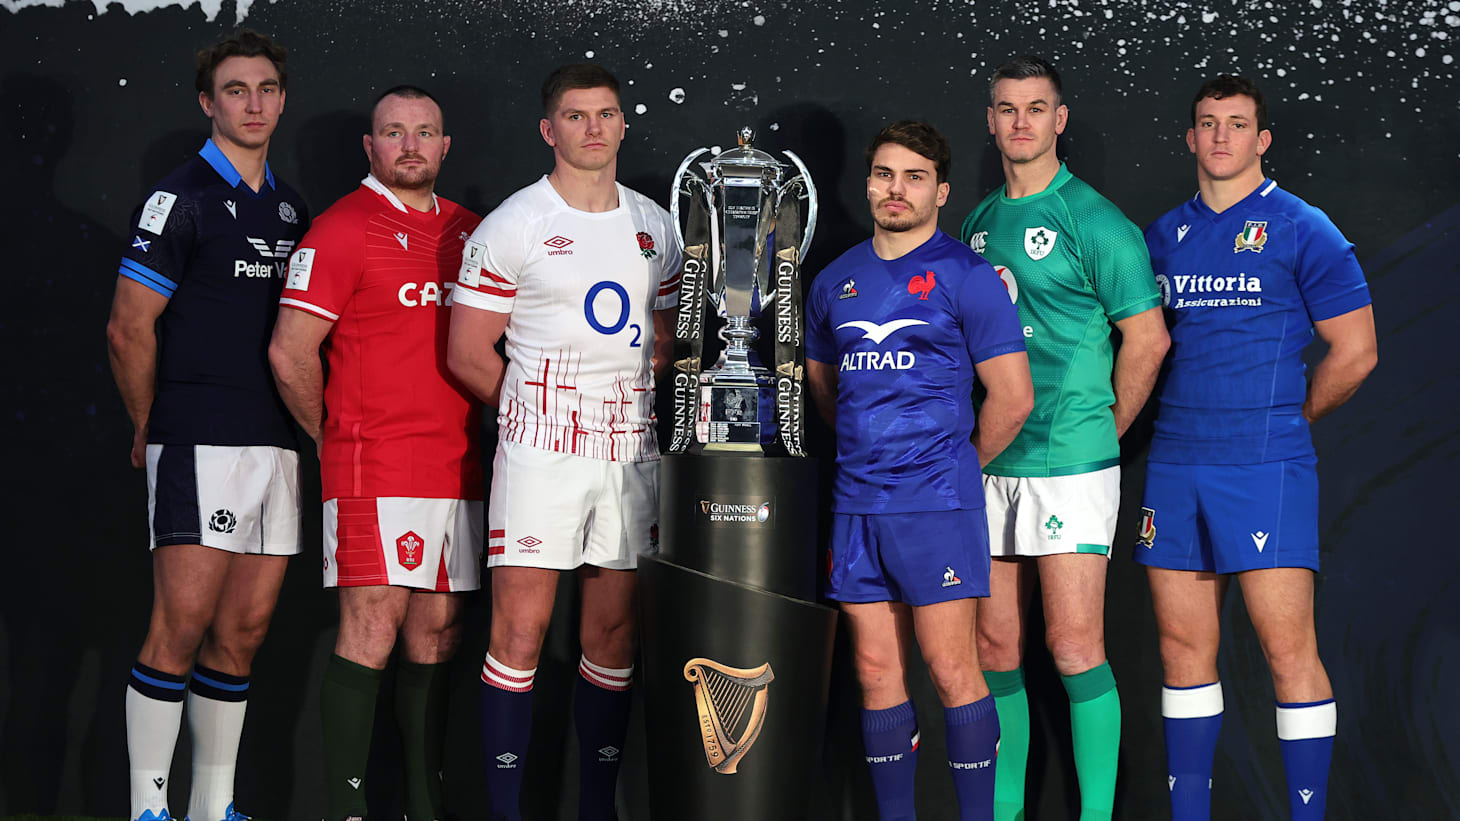 6 nations rugby where to watch